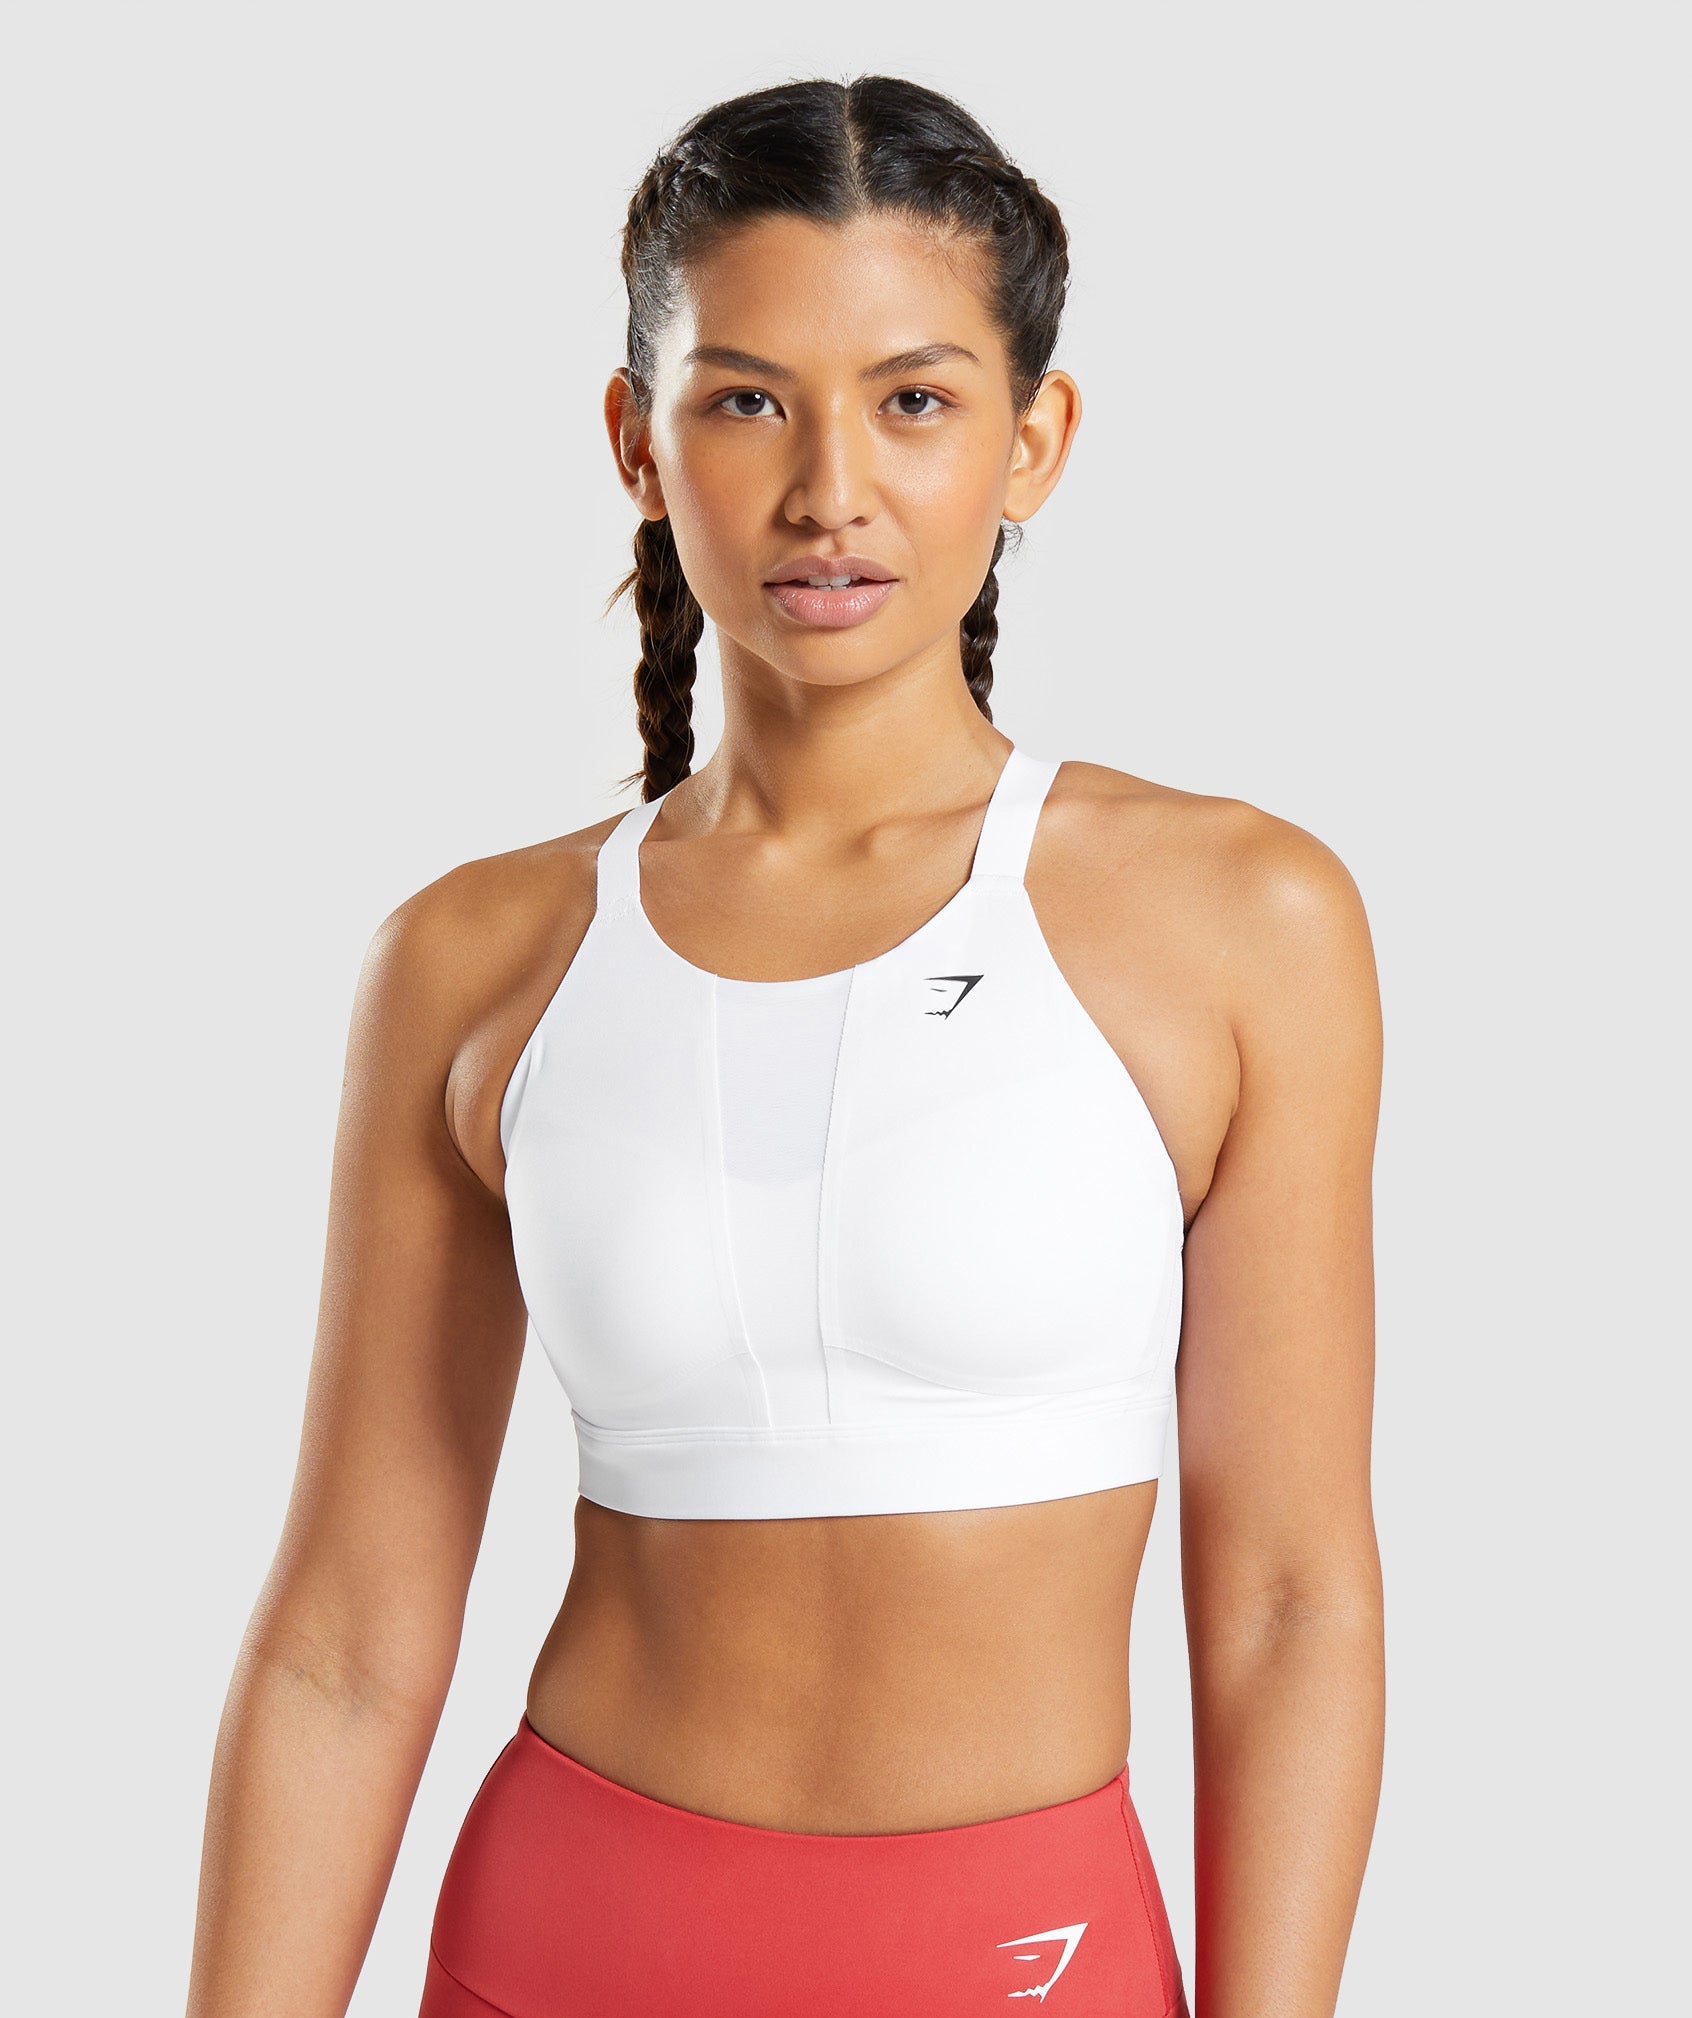 Solid White Sports Bra Cut Out Mesh Workout Cropped Top Perforated Women  Activewear Support Gym Tank Top Plain Geometry Bralette Sportswear 